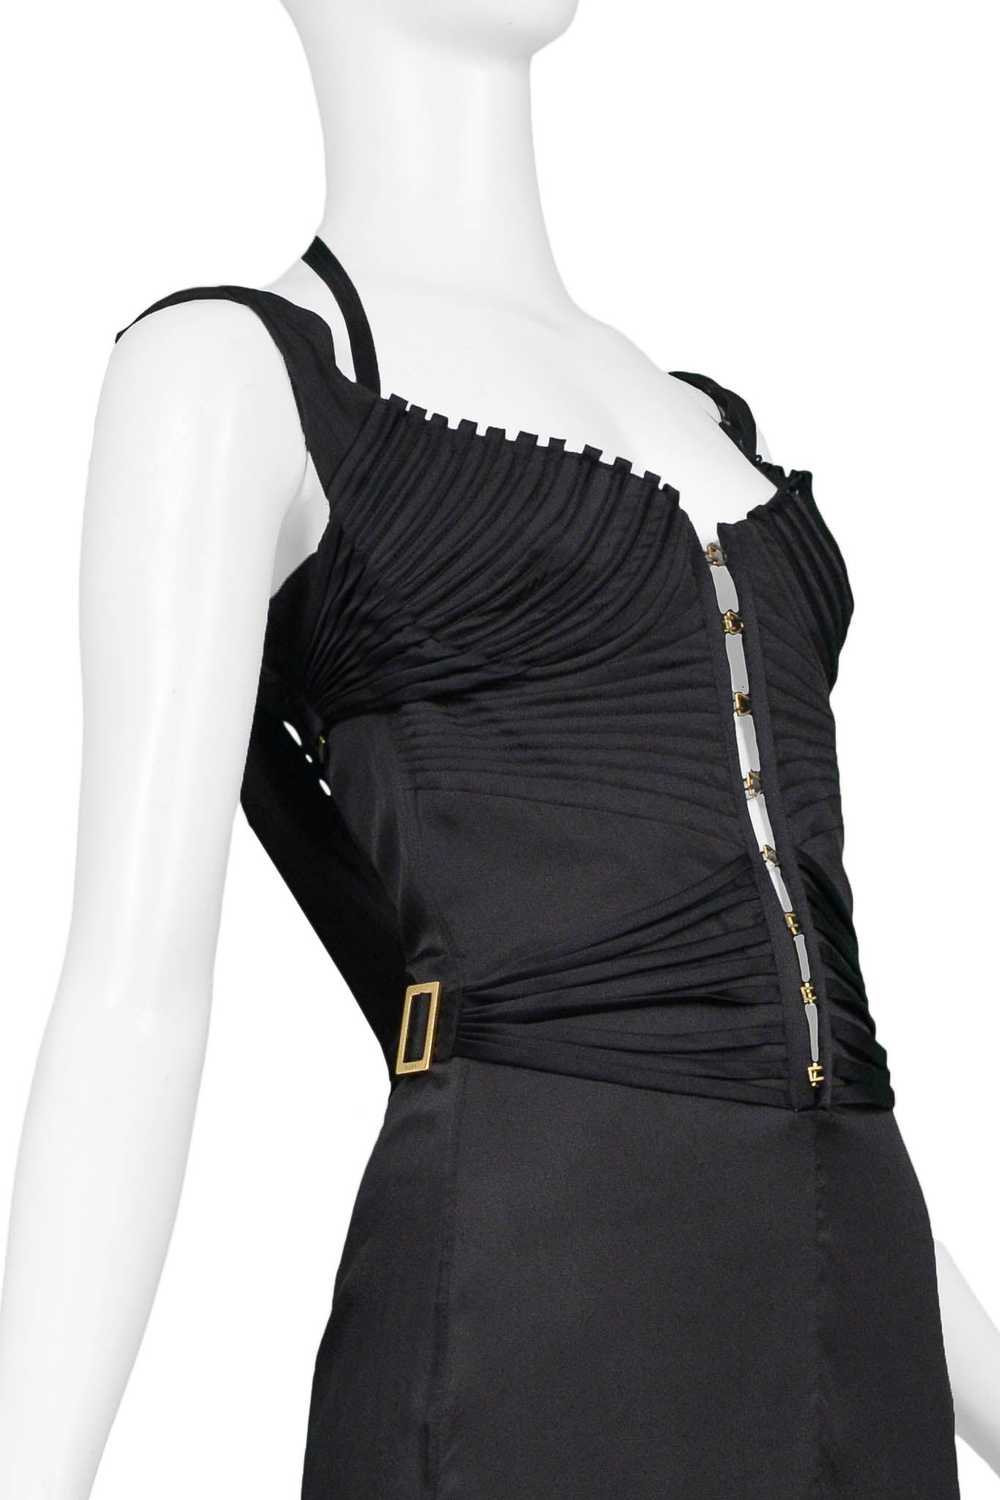 GUCCI BY TOM FORD BLACK CORSET COCKTAIL DRESS 2003 - image 7